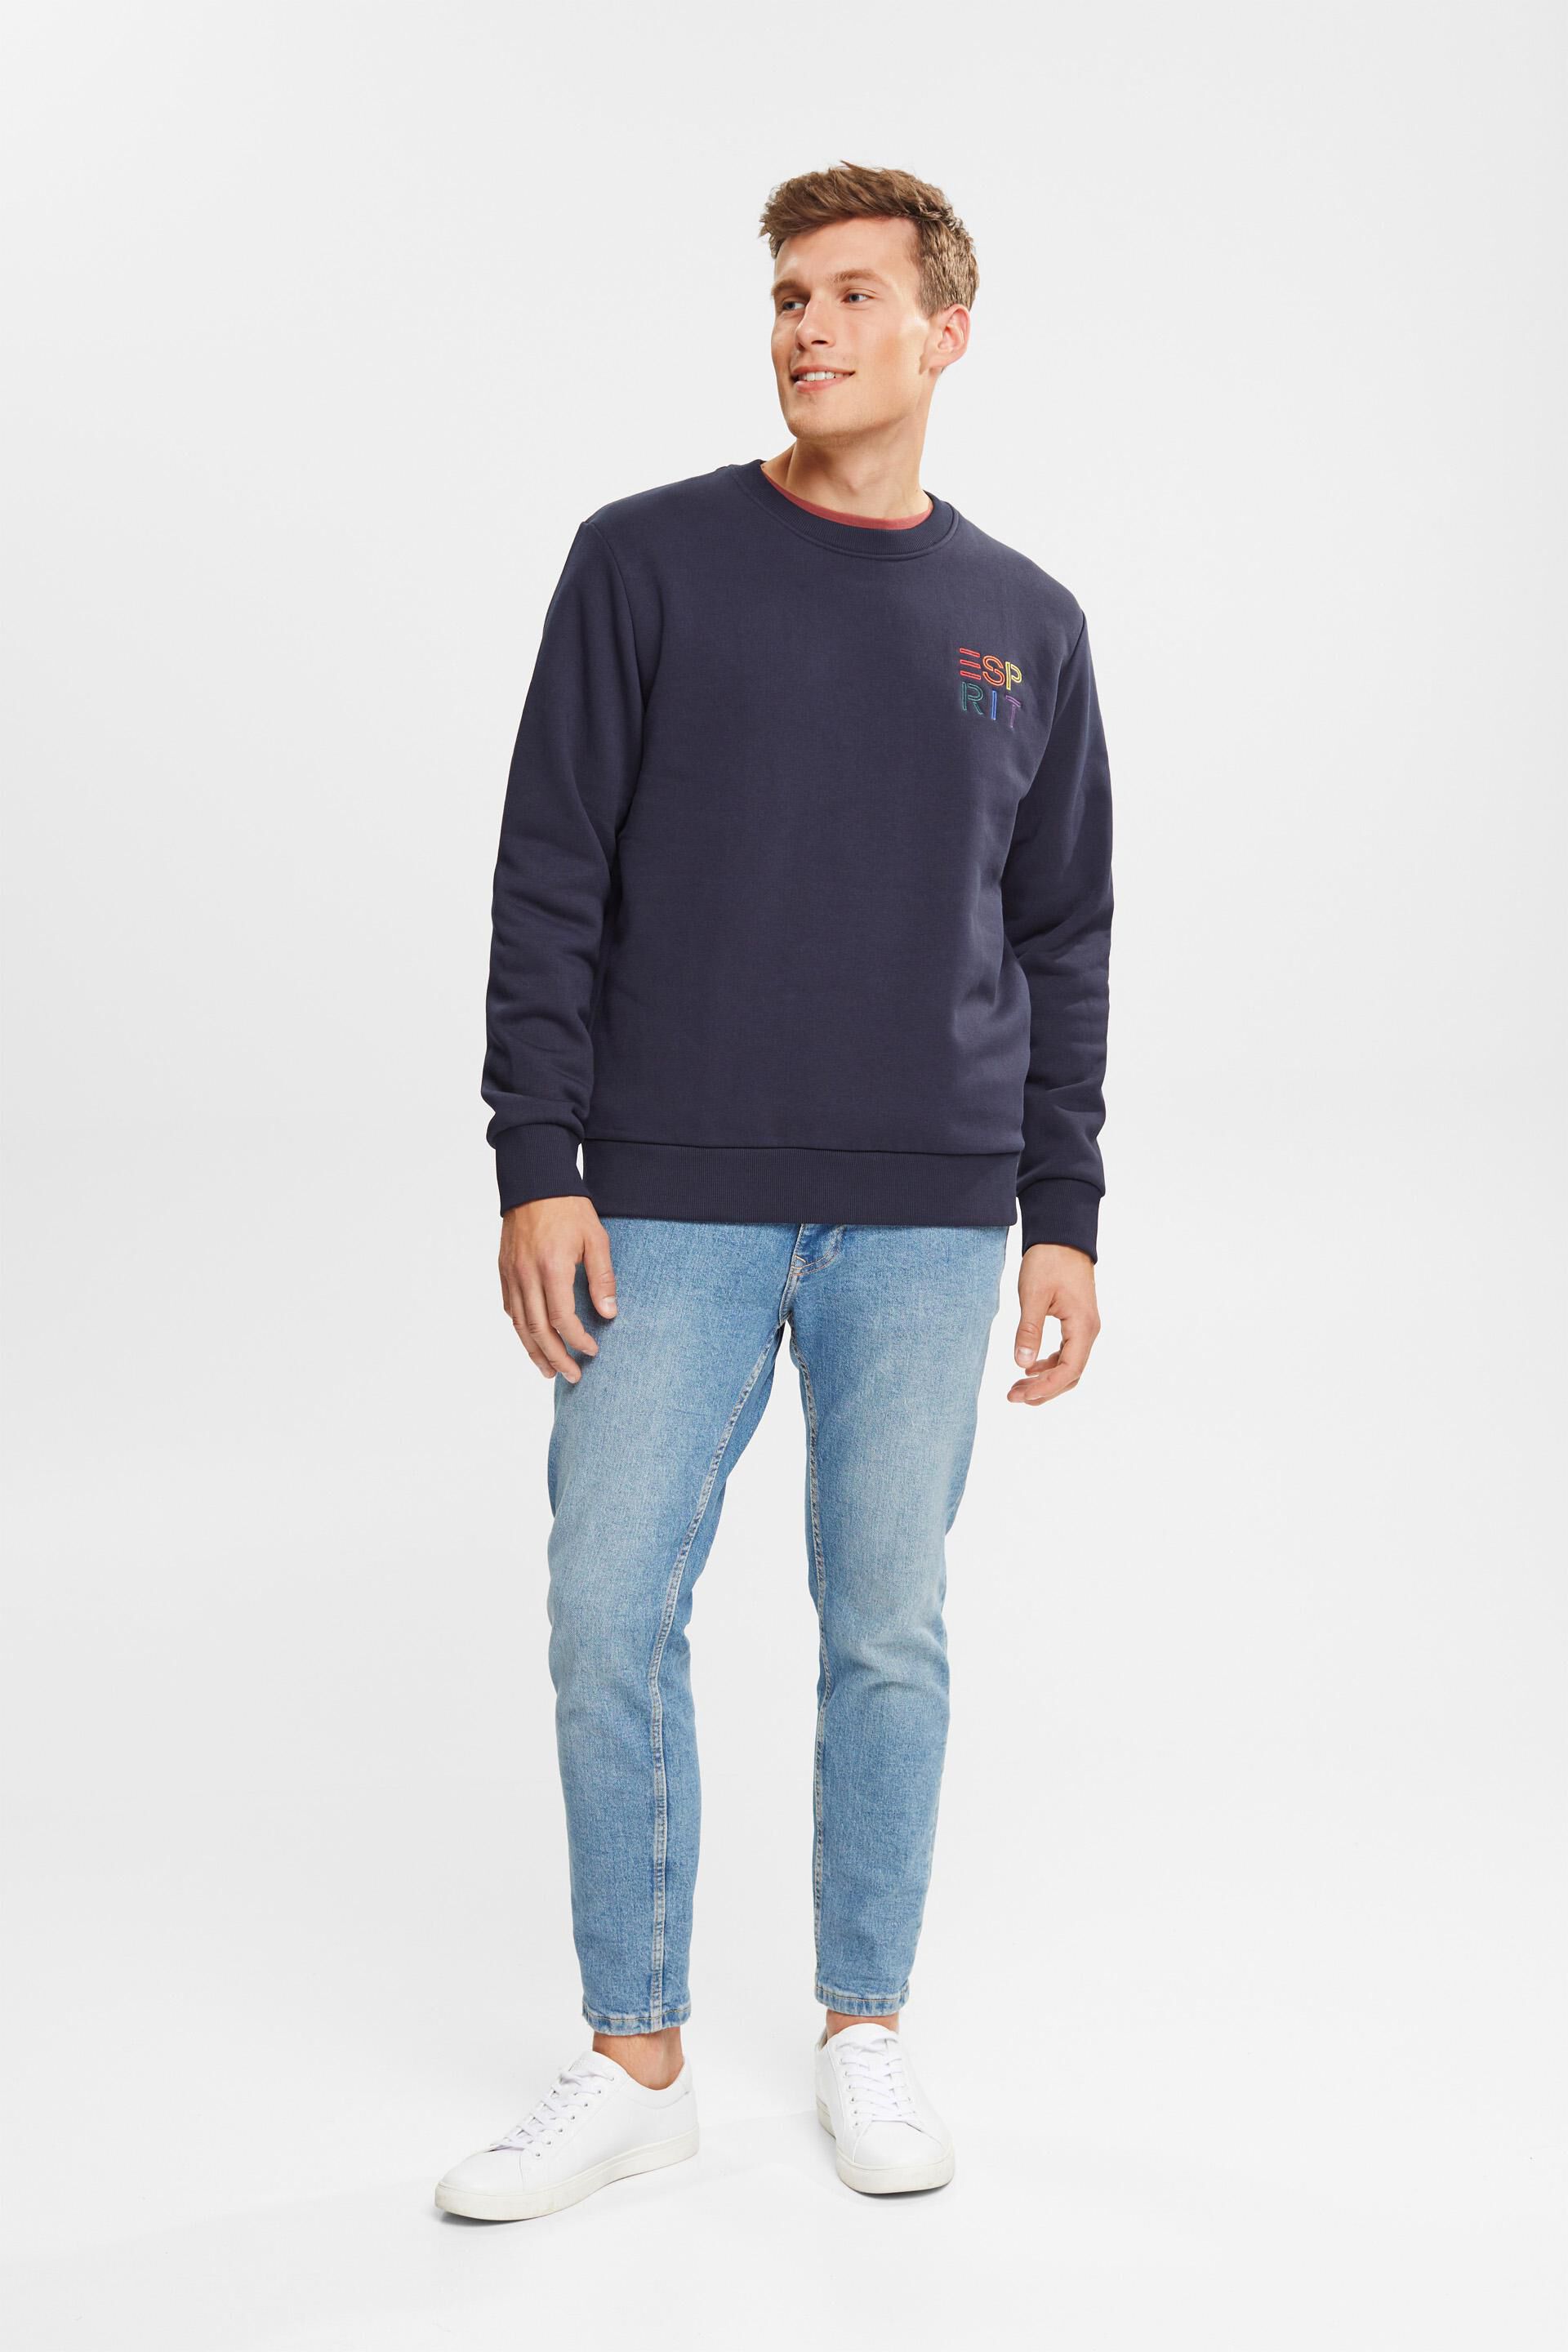 Esprit Sweatshirt colourful a with logo embroidered